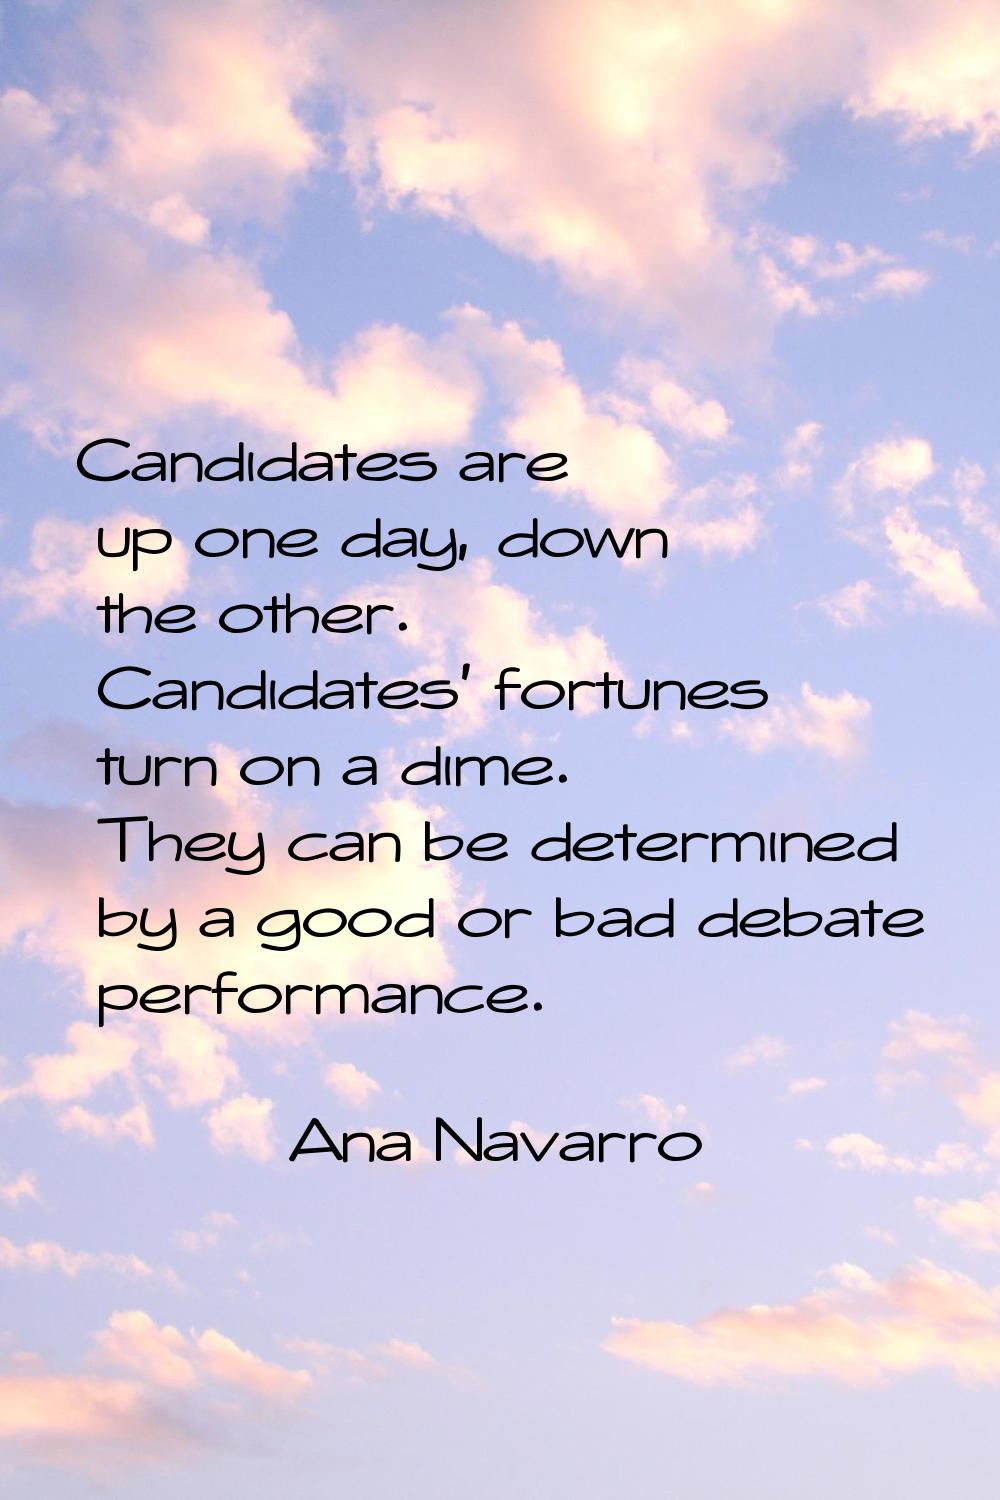 Candidates are up one day, down the other. Candidates' fortunes turn on a dime. They can be determi